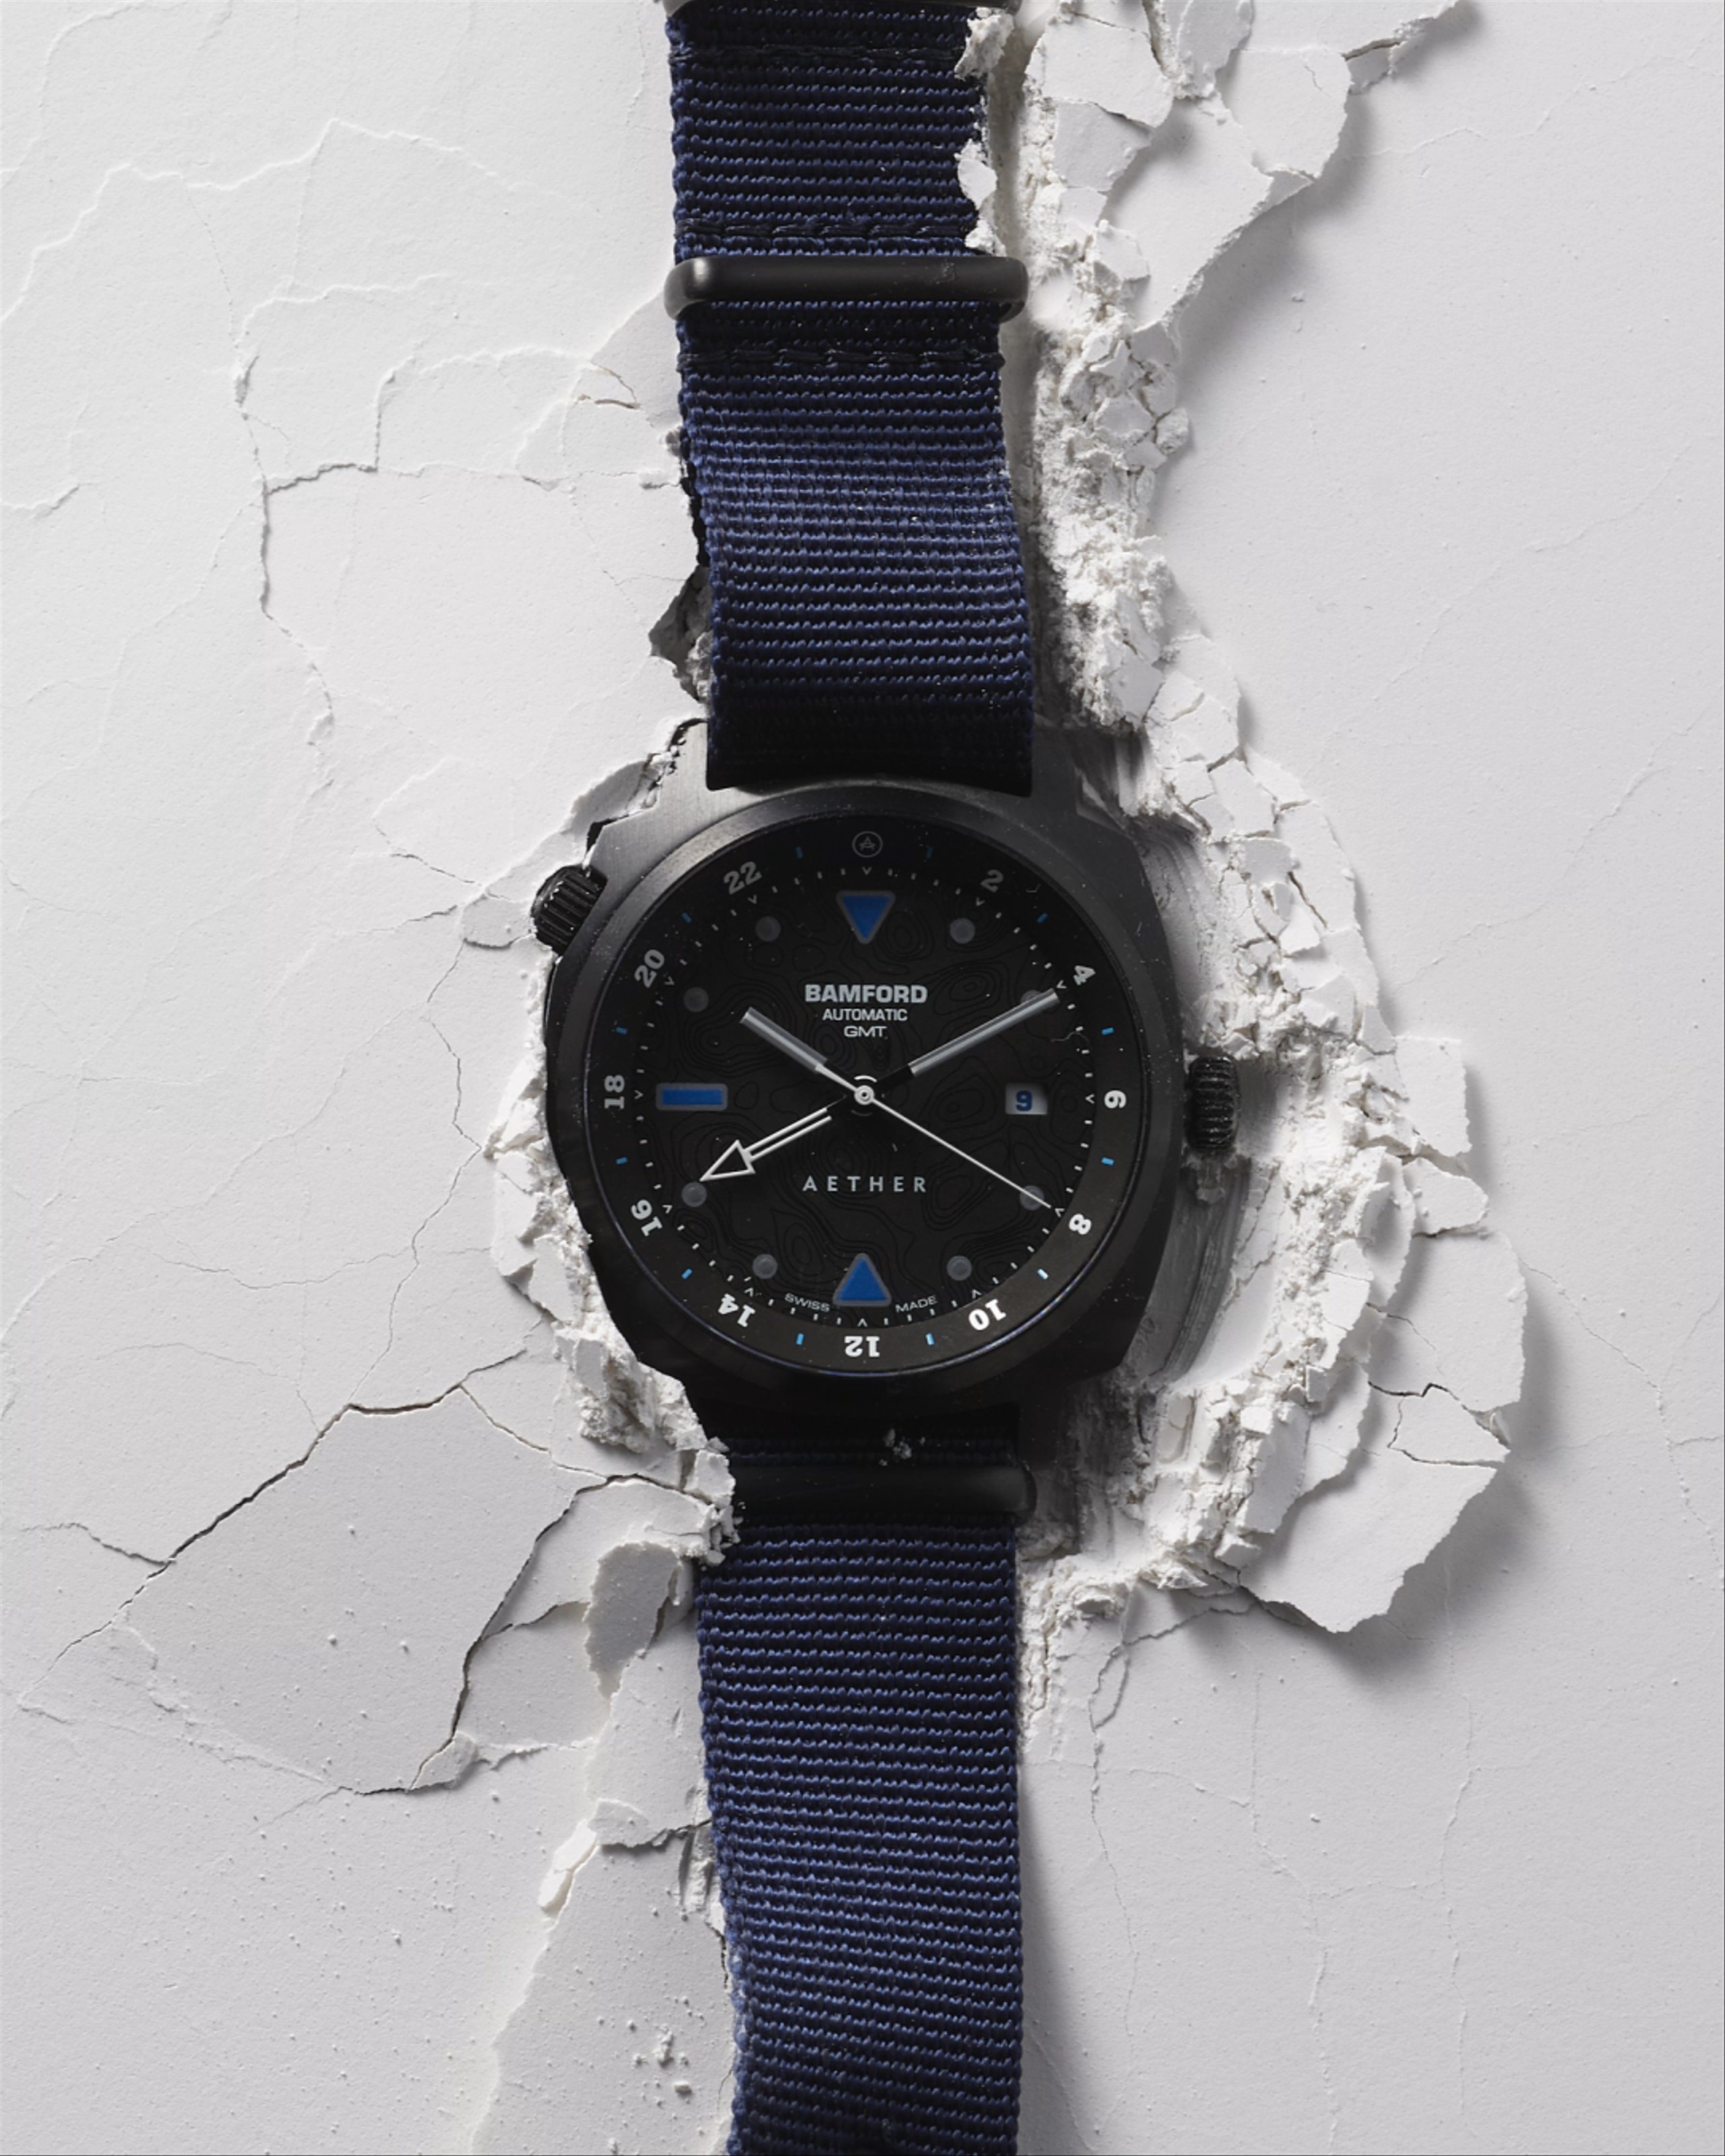 AETHER Bamford watch sitting into broken white surface with animated second hand rotating